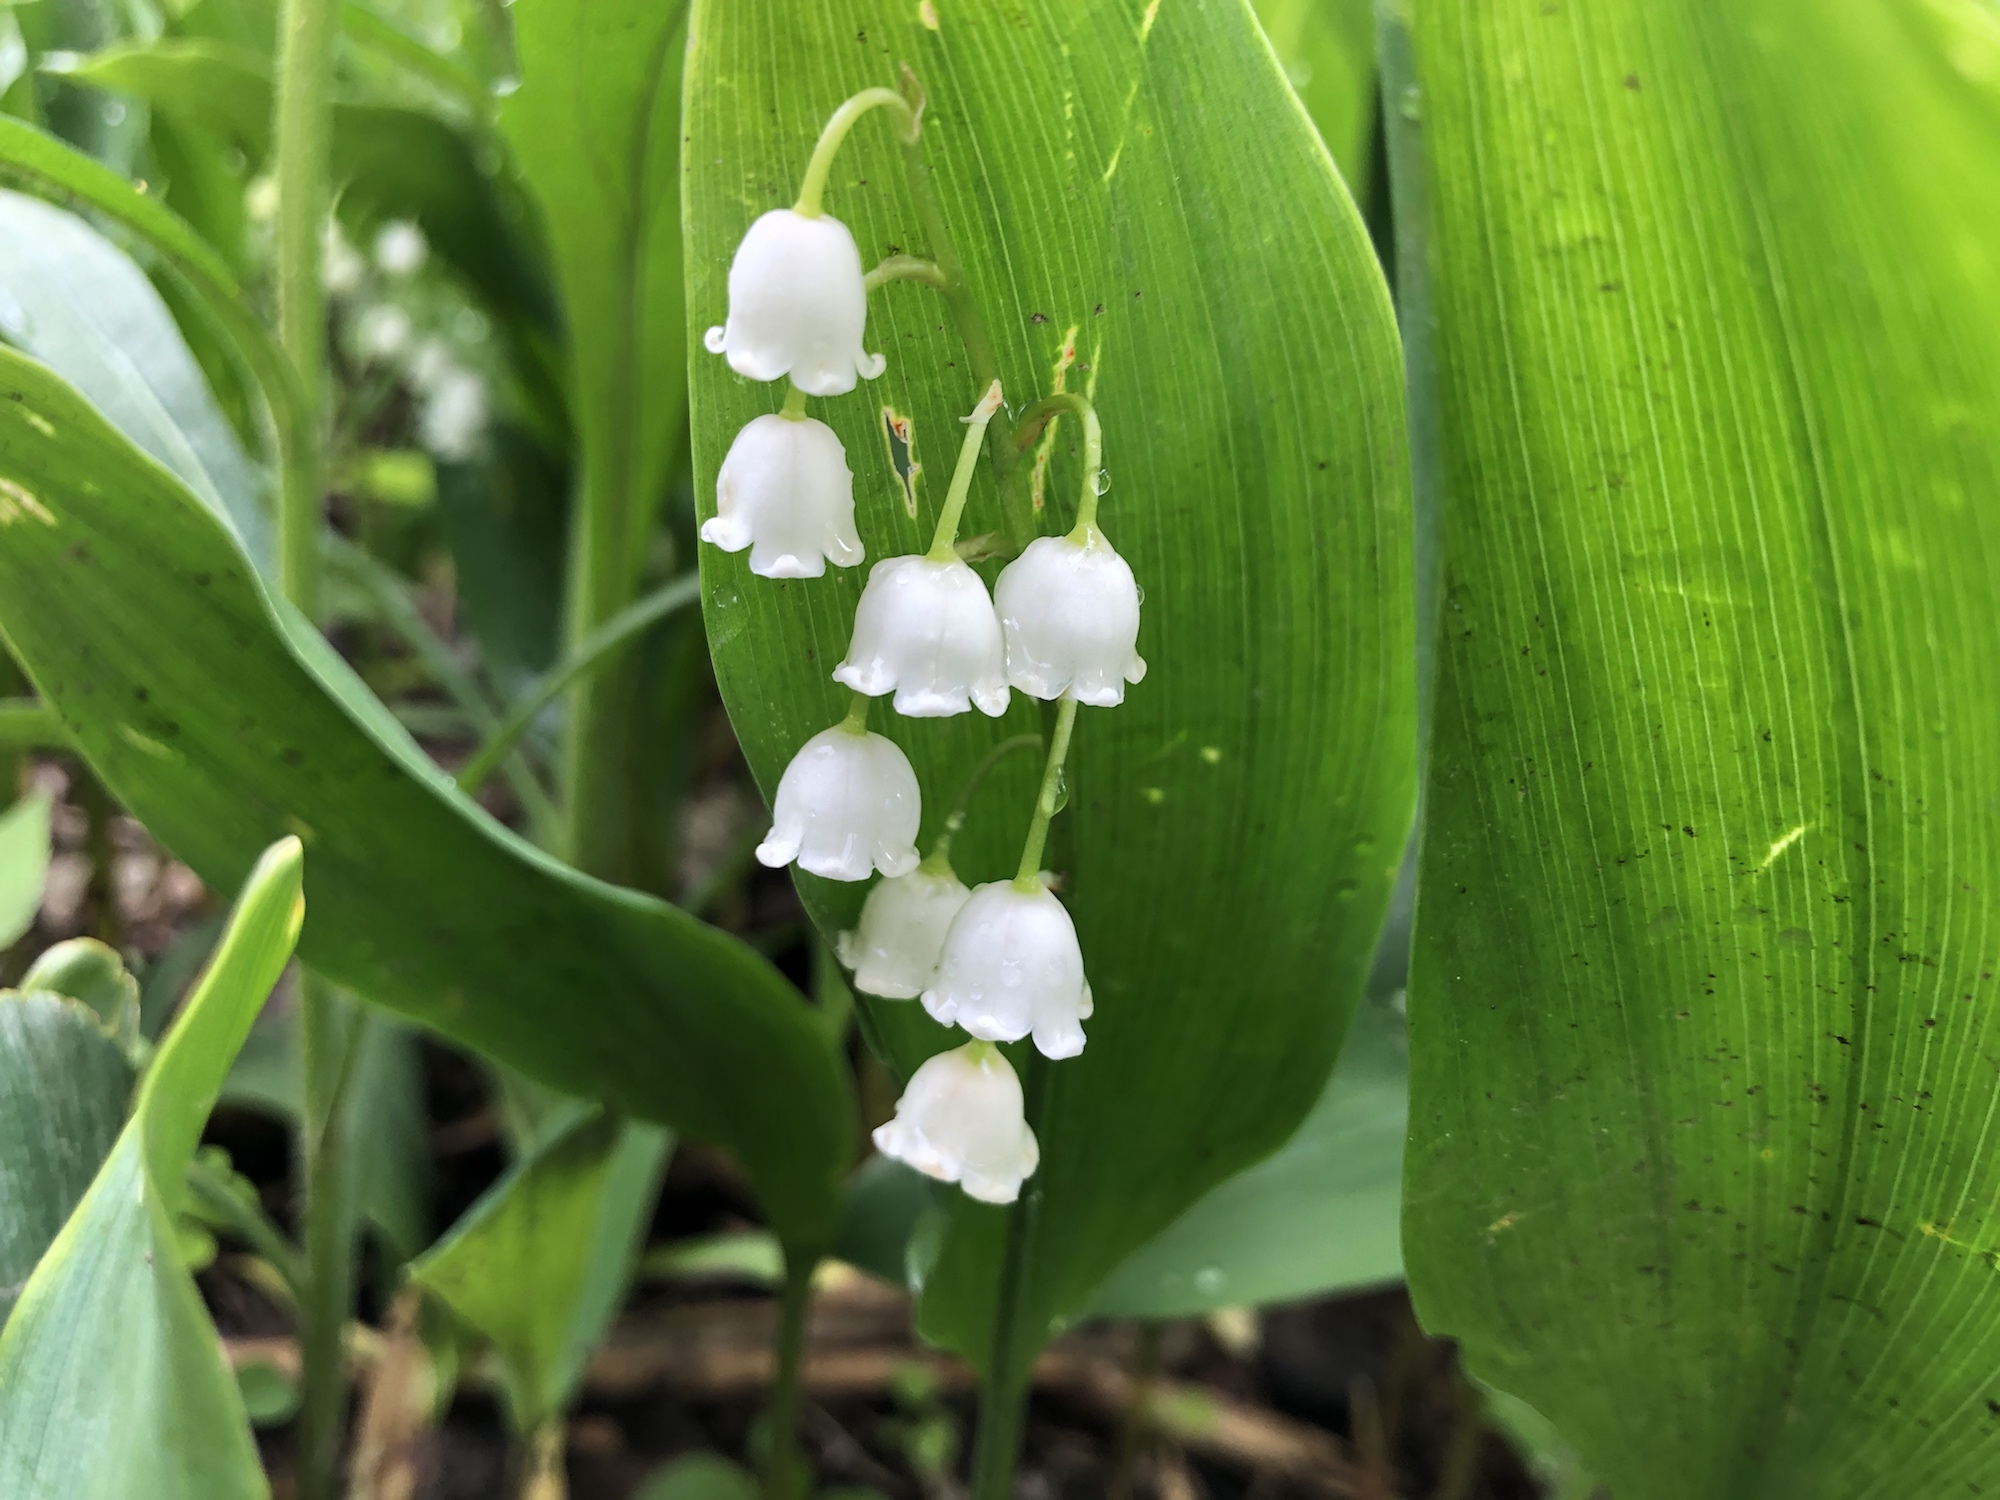 Lilly of the Valley on May 24, 2019.